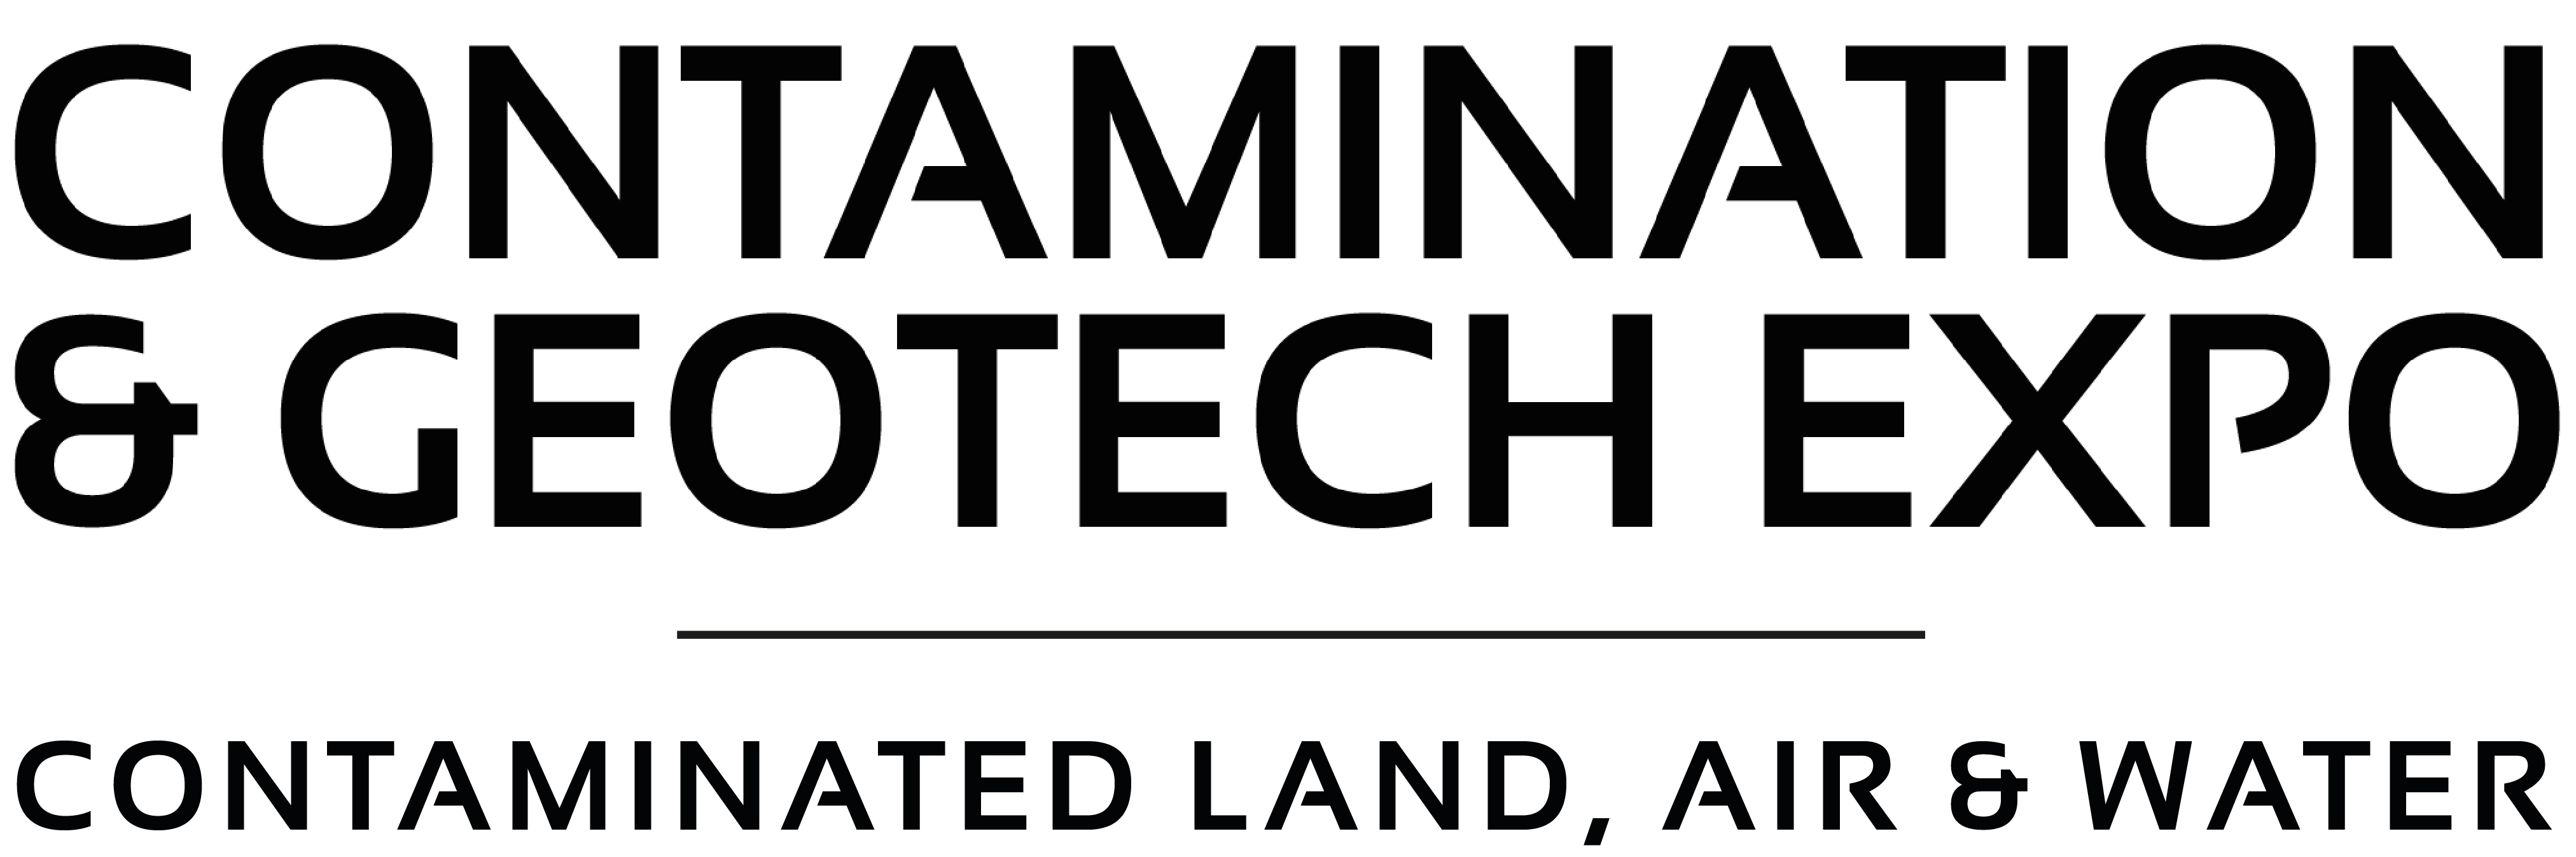 Contamination &amp; Geotech Expo 2022 - Registration now open